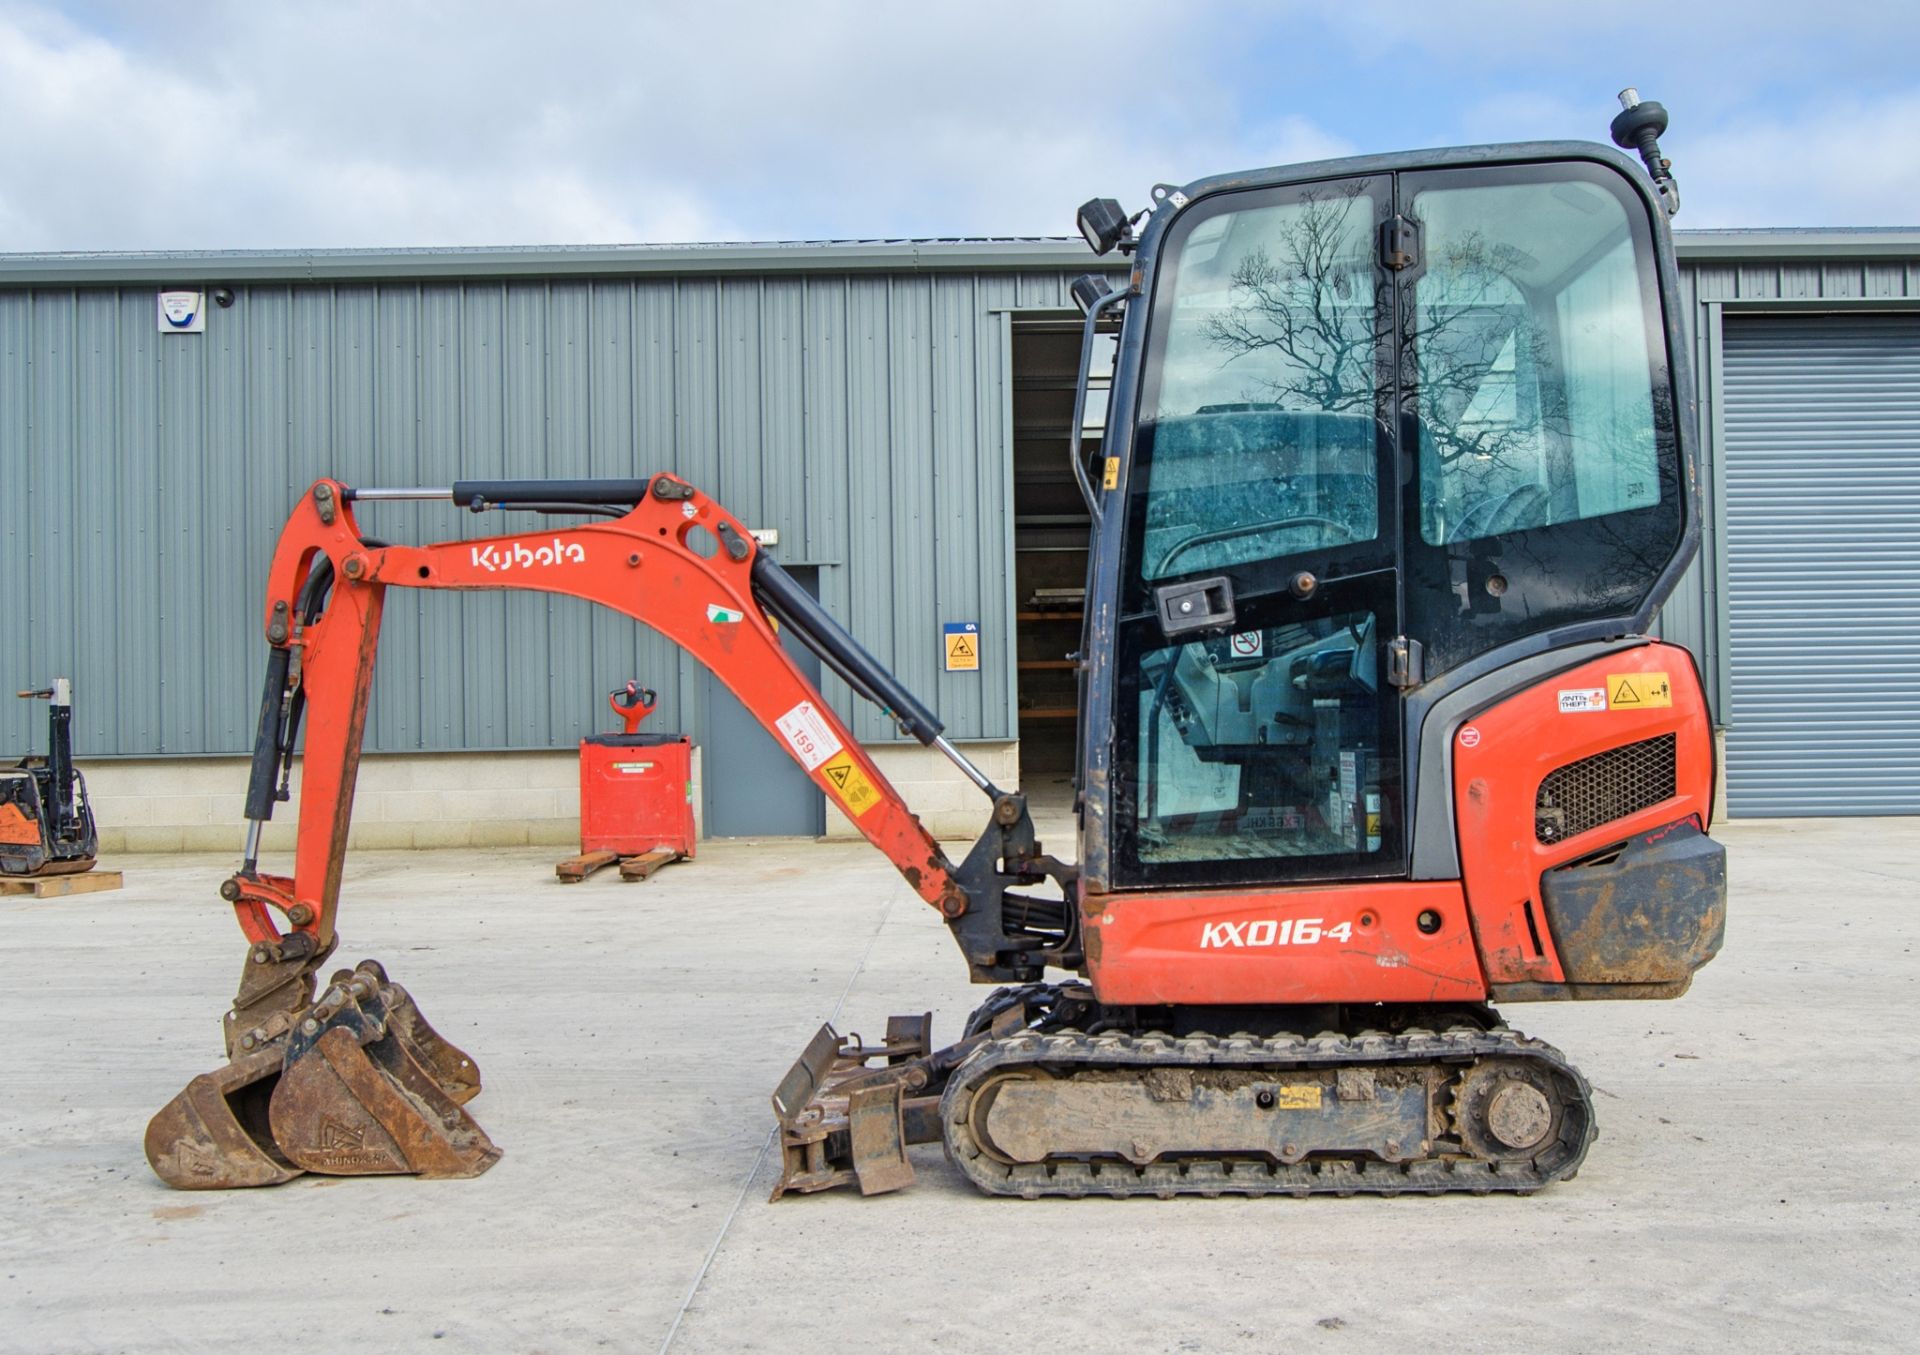 Kubota KX016-4 1.5 tonne rubber tracked excavator Year: 2017 S/N: 61044 Recorded Hours: 2260 - Image 8 of 26